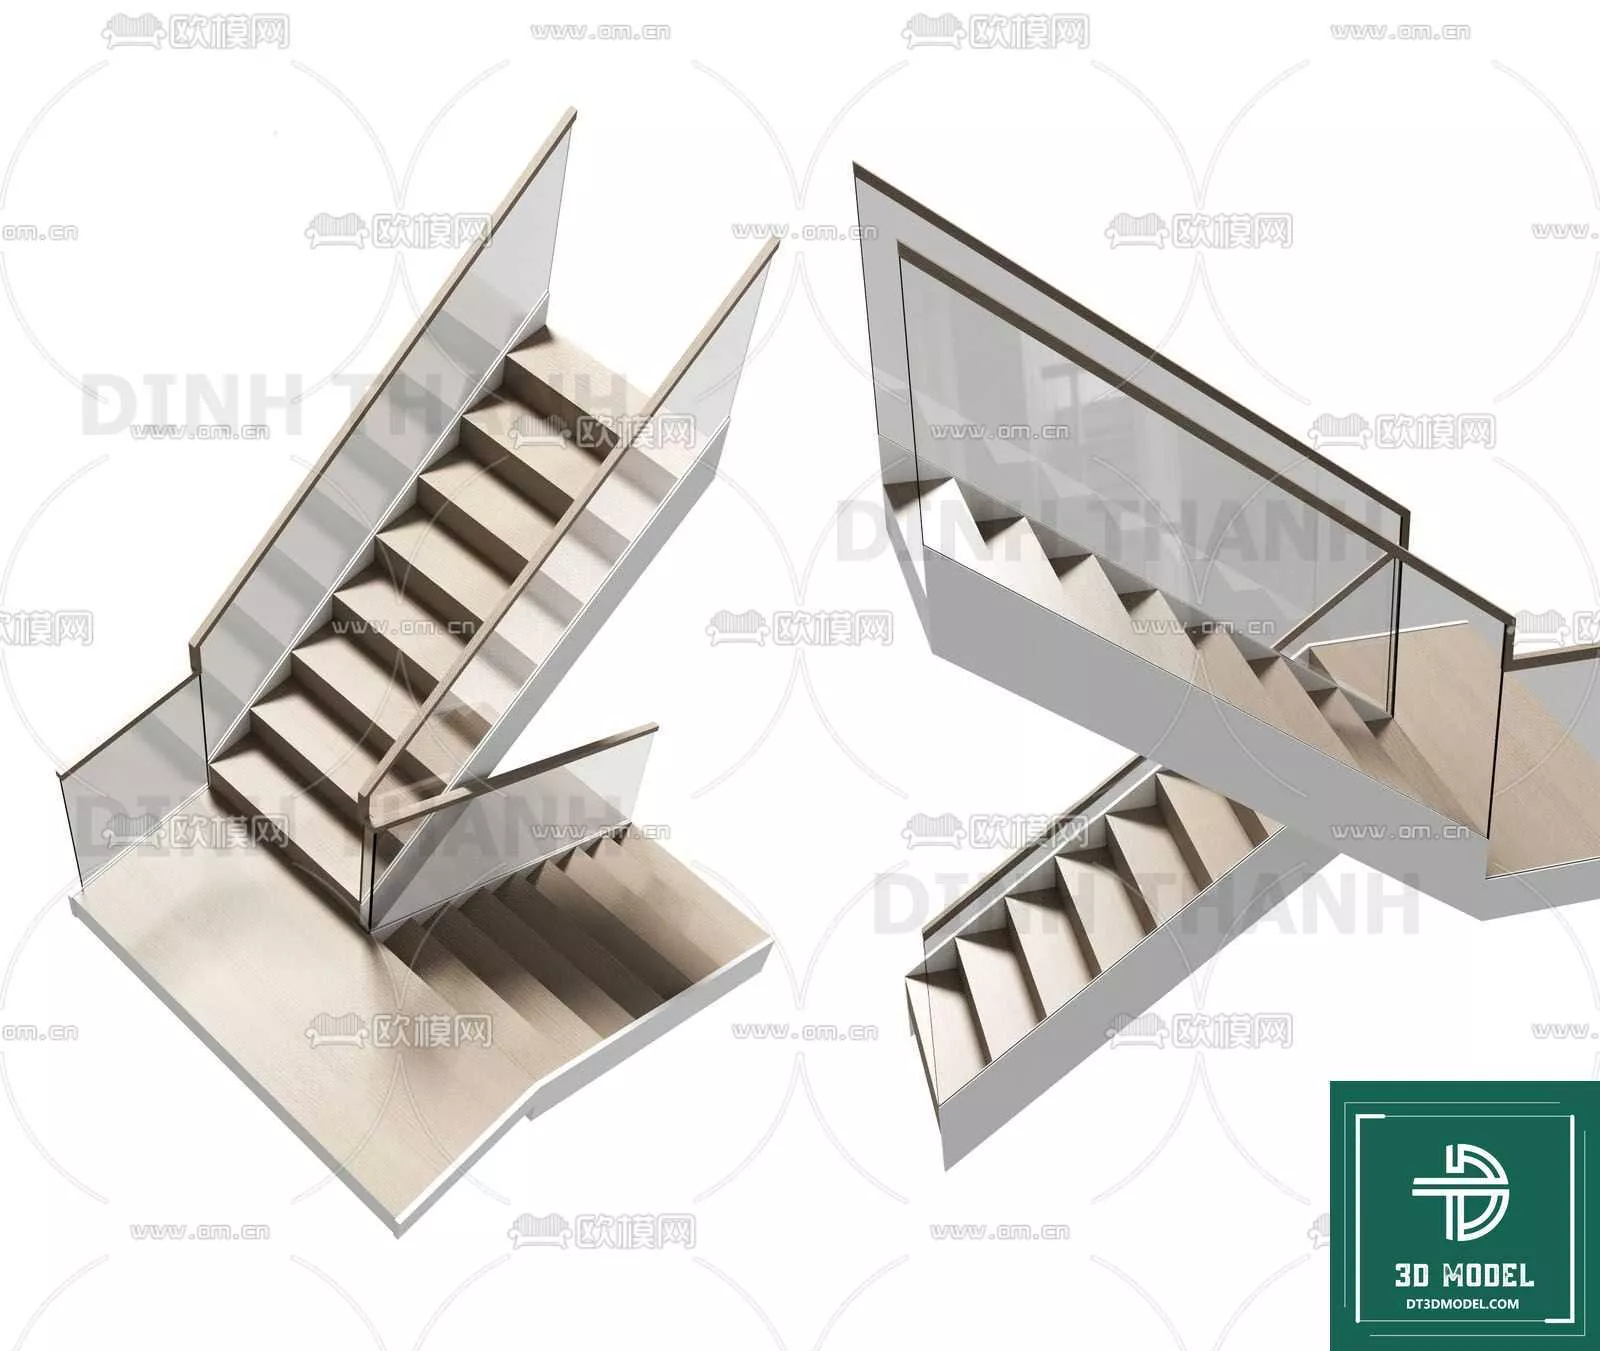 MODERN STAIR - SKETCHUP 3D MODEL - VRAY OR ENSCAPE - ID14160